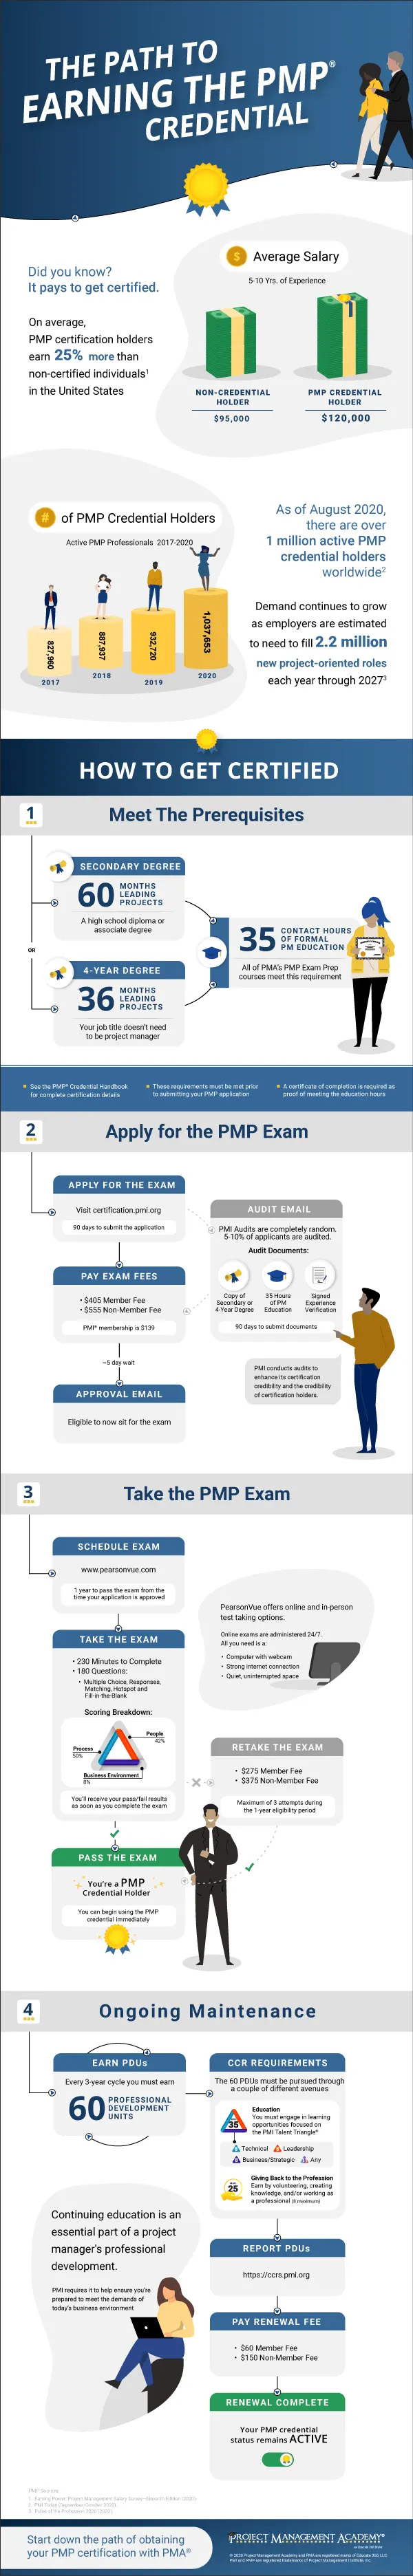 The Path to Earning the PMP Credential